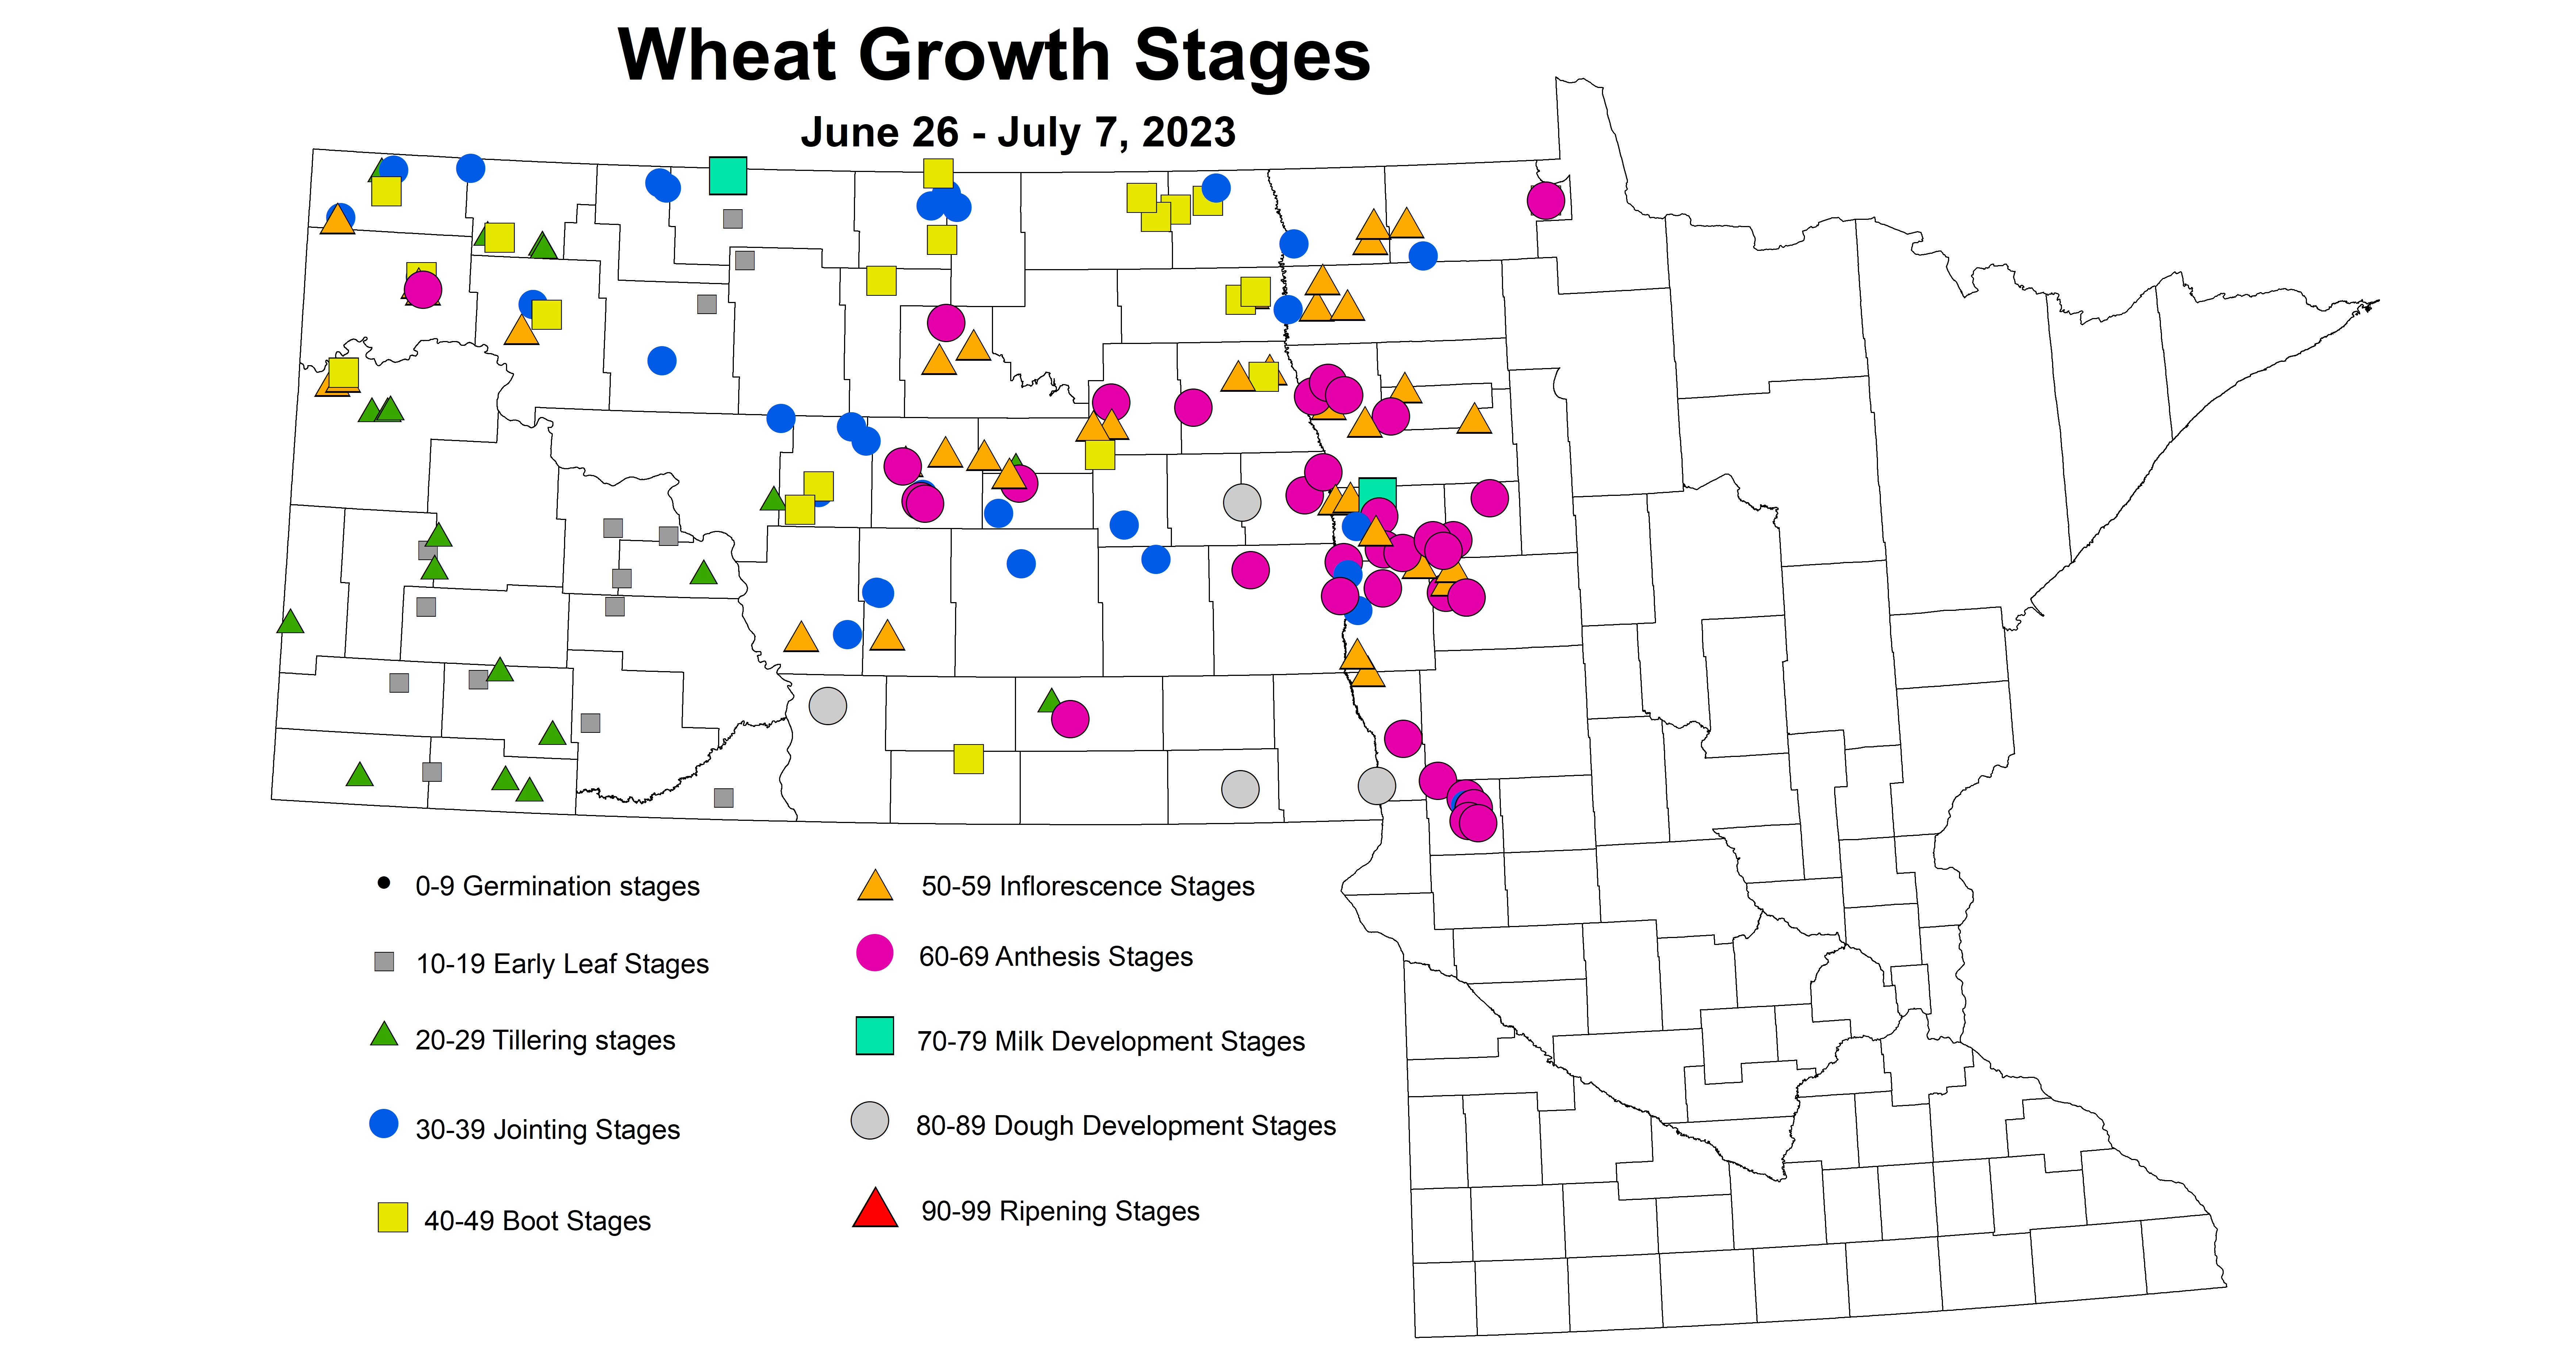 wheat growth stages June 26 - July 7 2023